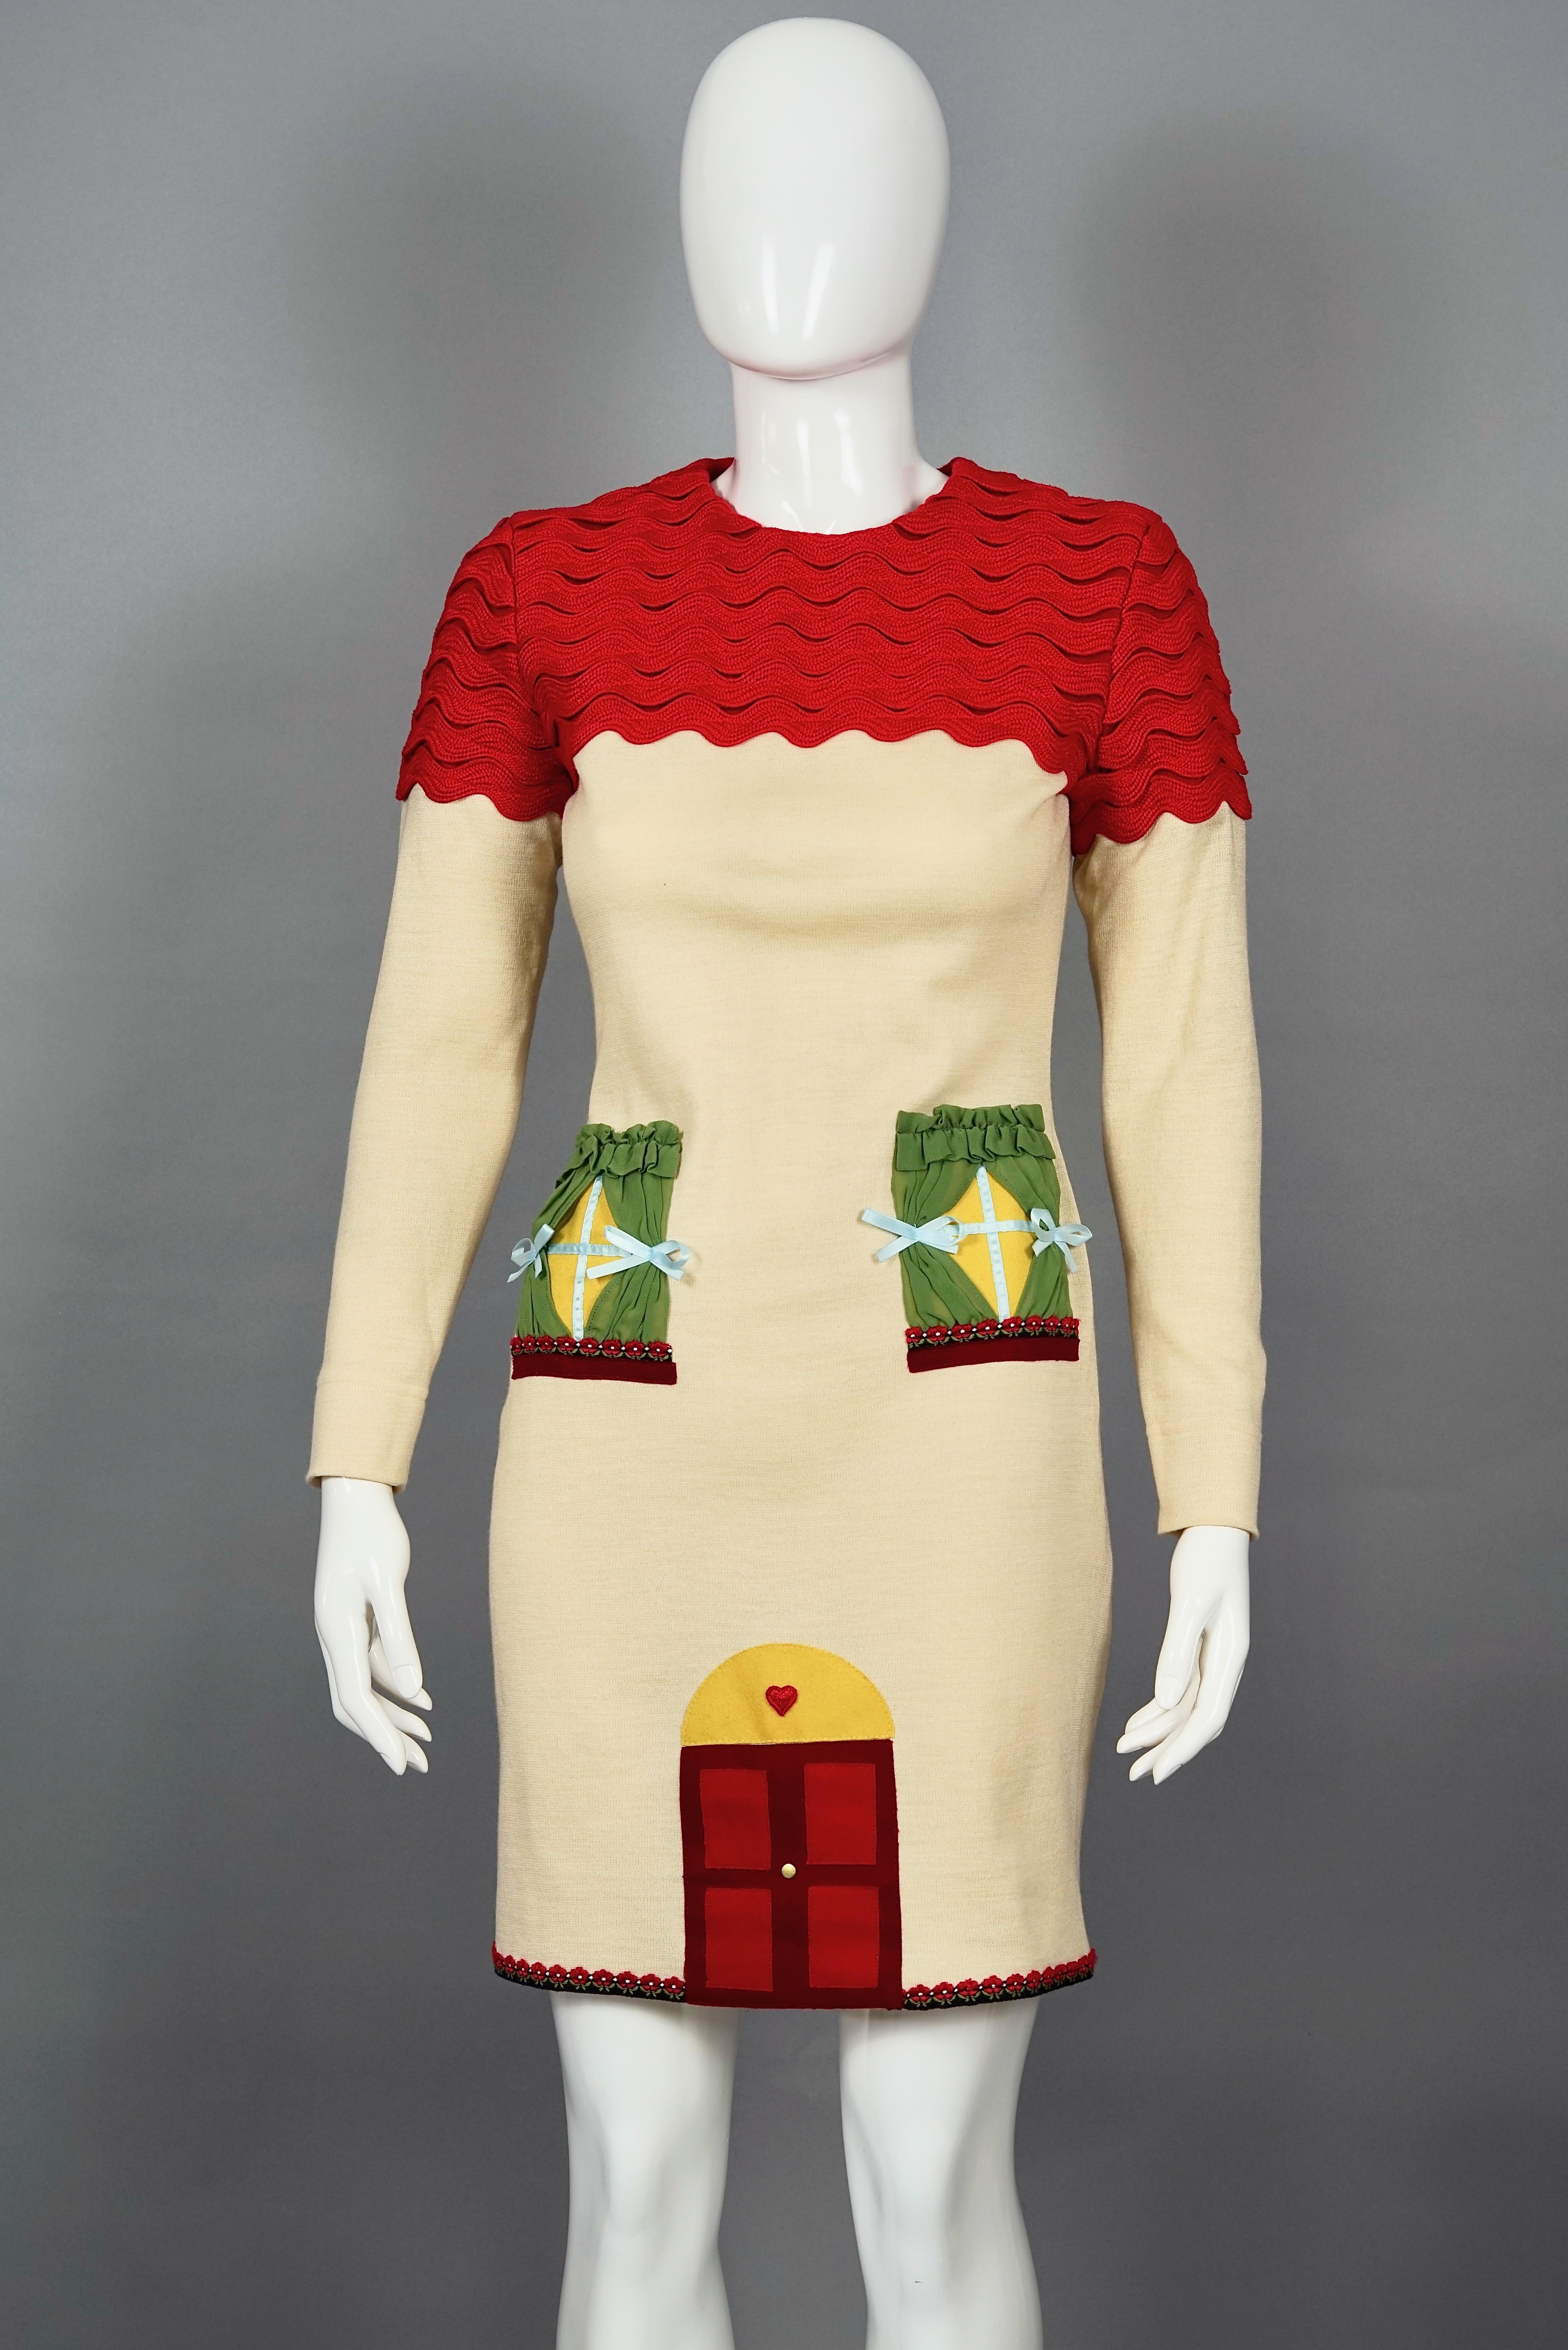 Vintage MOSCHINO CHEAP and CHIC Italian House Novelty Applique Whimsical Dress

Measurements taken laid flat:
Shoulder: 14.96 inches (38 cm)
Sleeves: 22.44 Inches (57 cm)
Bust: 17.32 inches (44 cm)
Waist: 14.17 inches (36 cm)
Hips: 16.92 inches (43